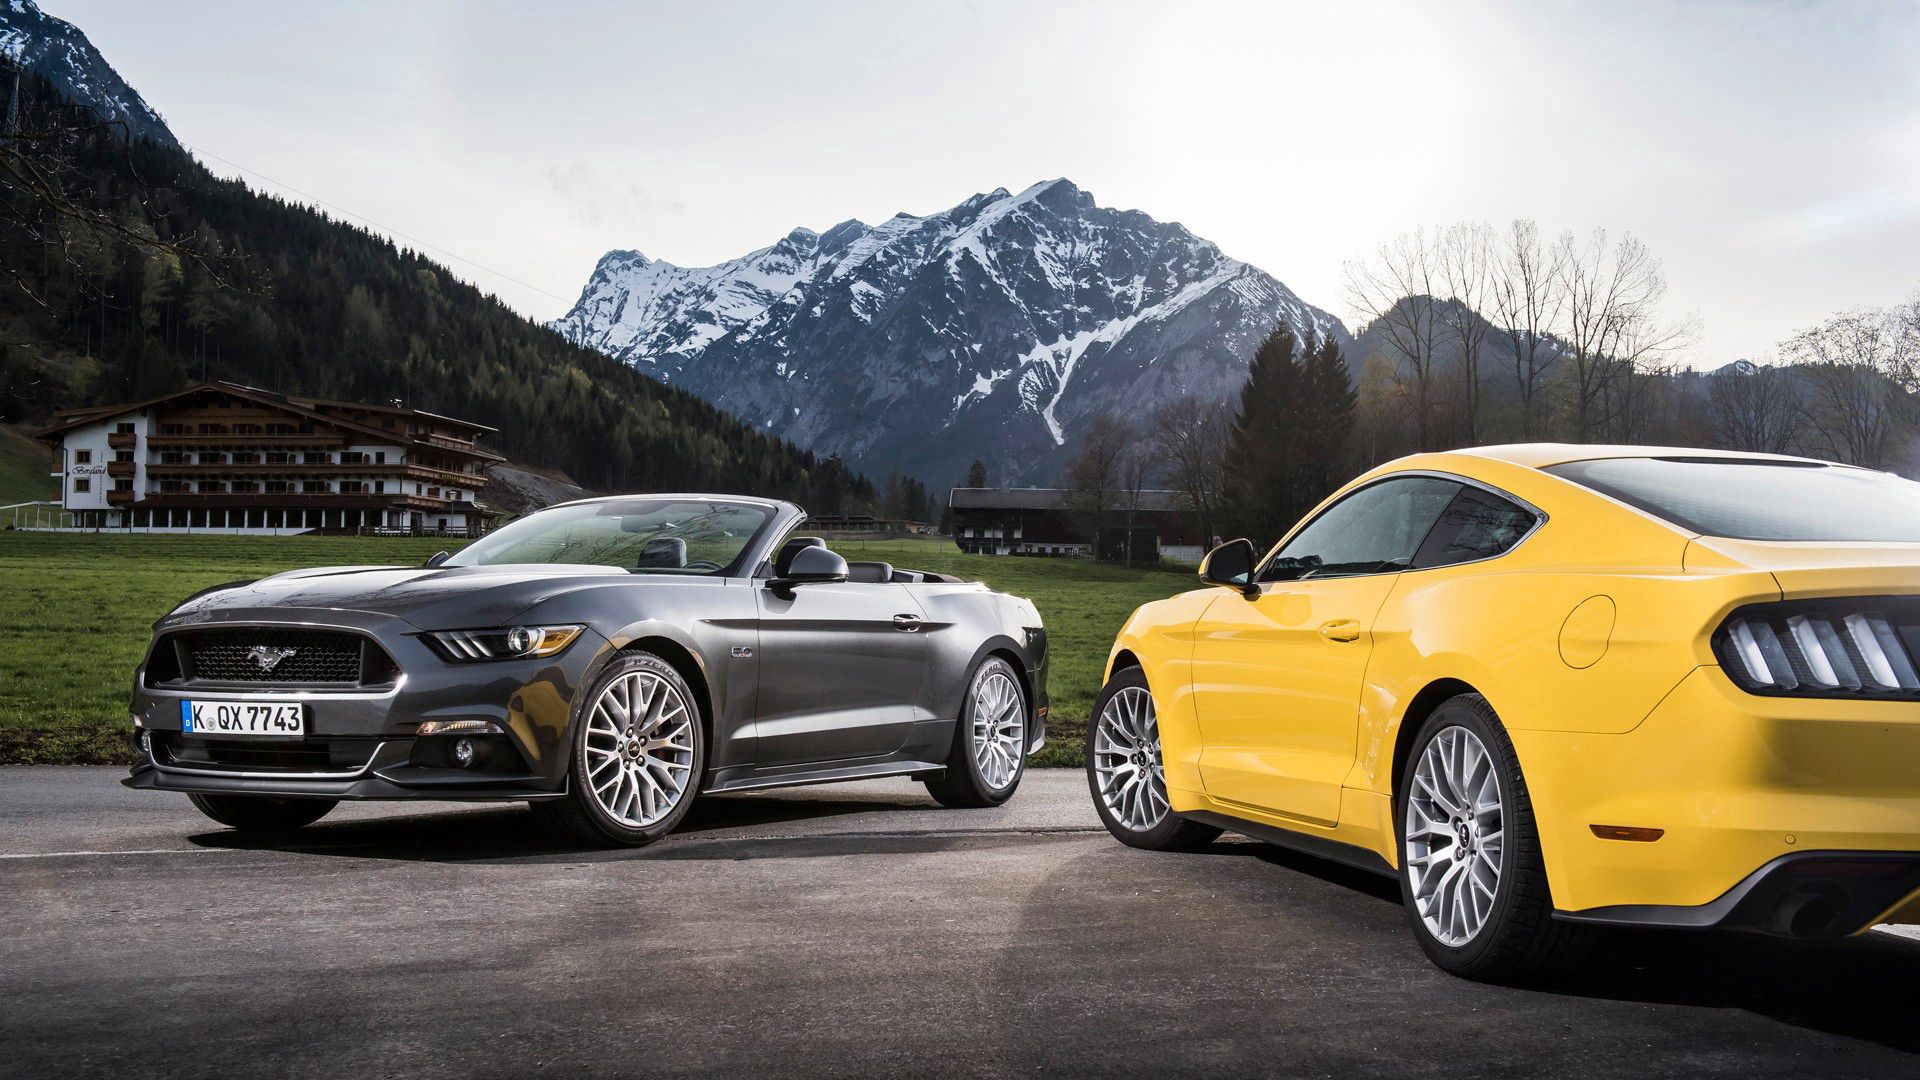 mountains, cars, yellow, cabriolet, ford mustang, silver, silvery